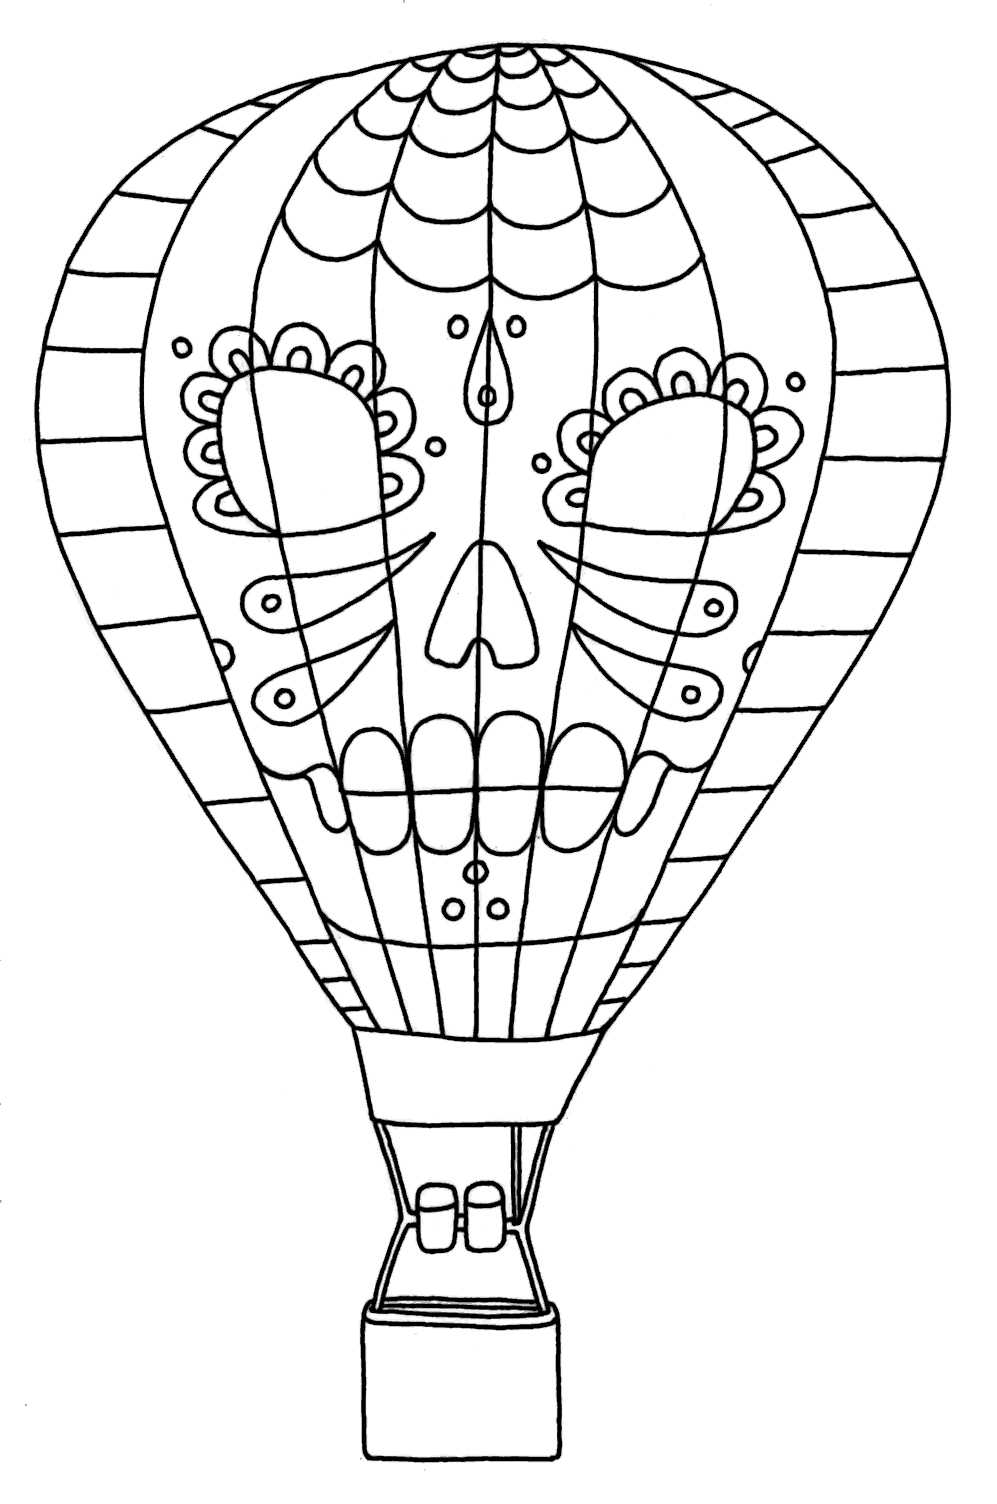 Yucca Flats, N.M.: Wenchkin's Coloring Pages - Dia de los Hot Air Balloon